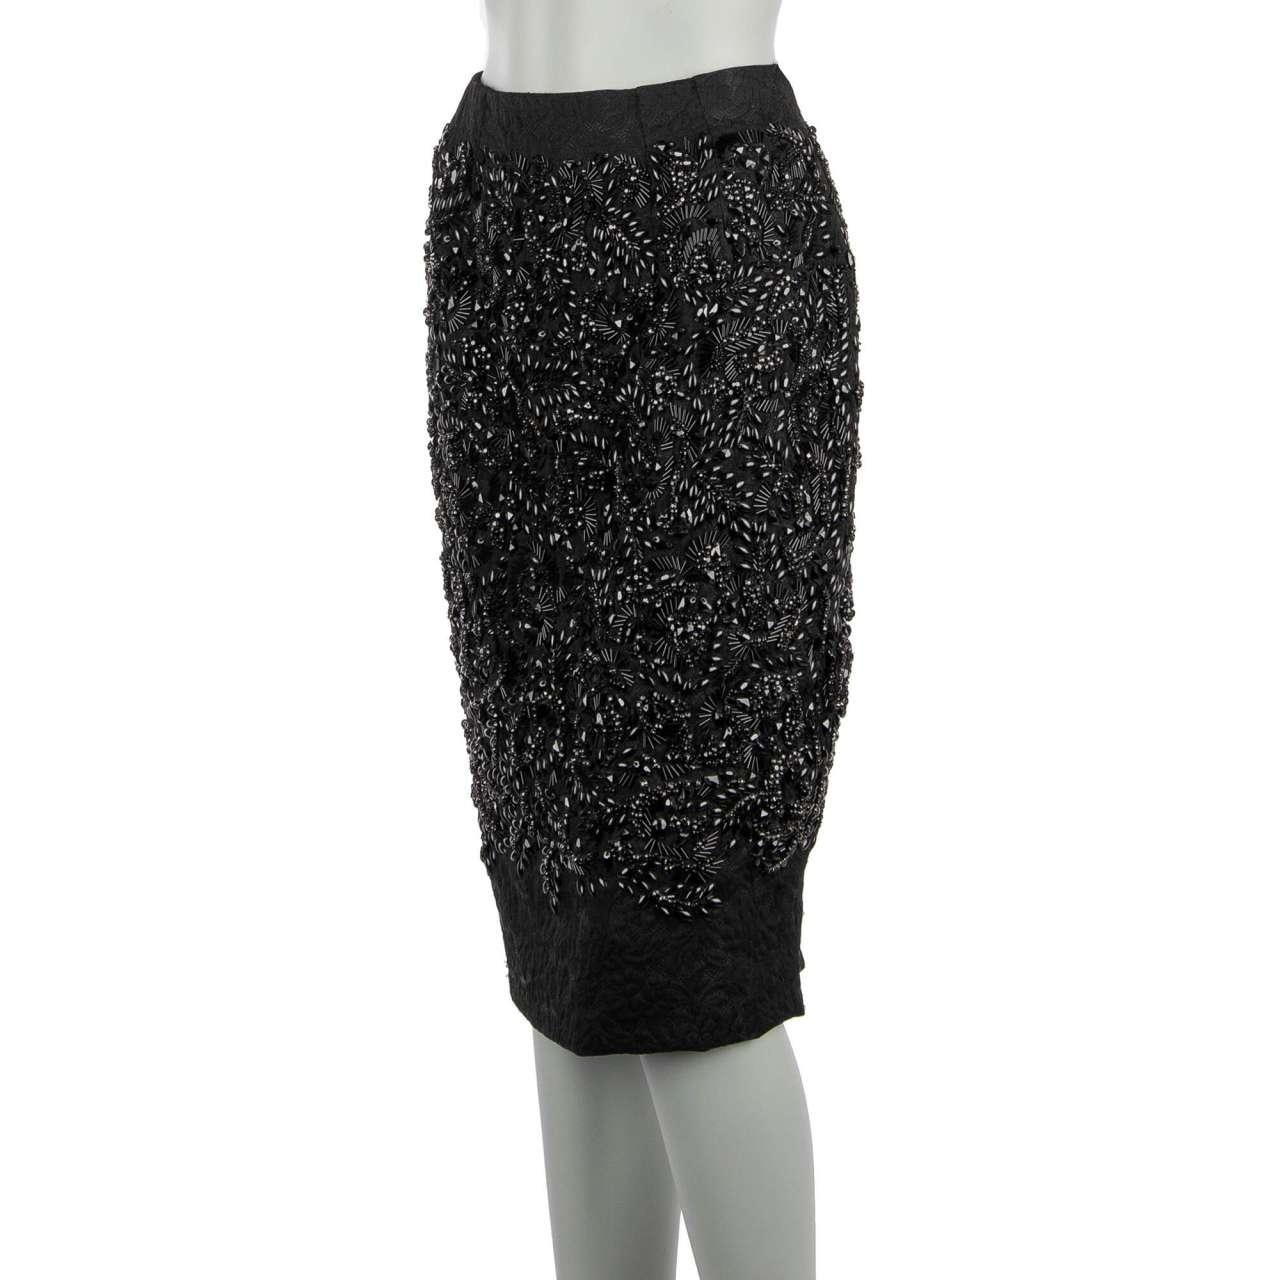 - Brocade skirt with crystals and pearls embroidery in black by DOLCE & GABBANA - MADE IN ITALY - New with Tag - Former RRP: EUR 6.900 - Concealed back zip closure - Crystals, pearls and plastic pieces embroidery - Model: F4L06Z-G6982-S9000 -